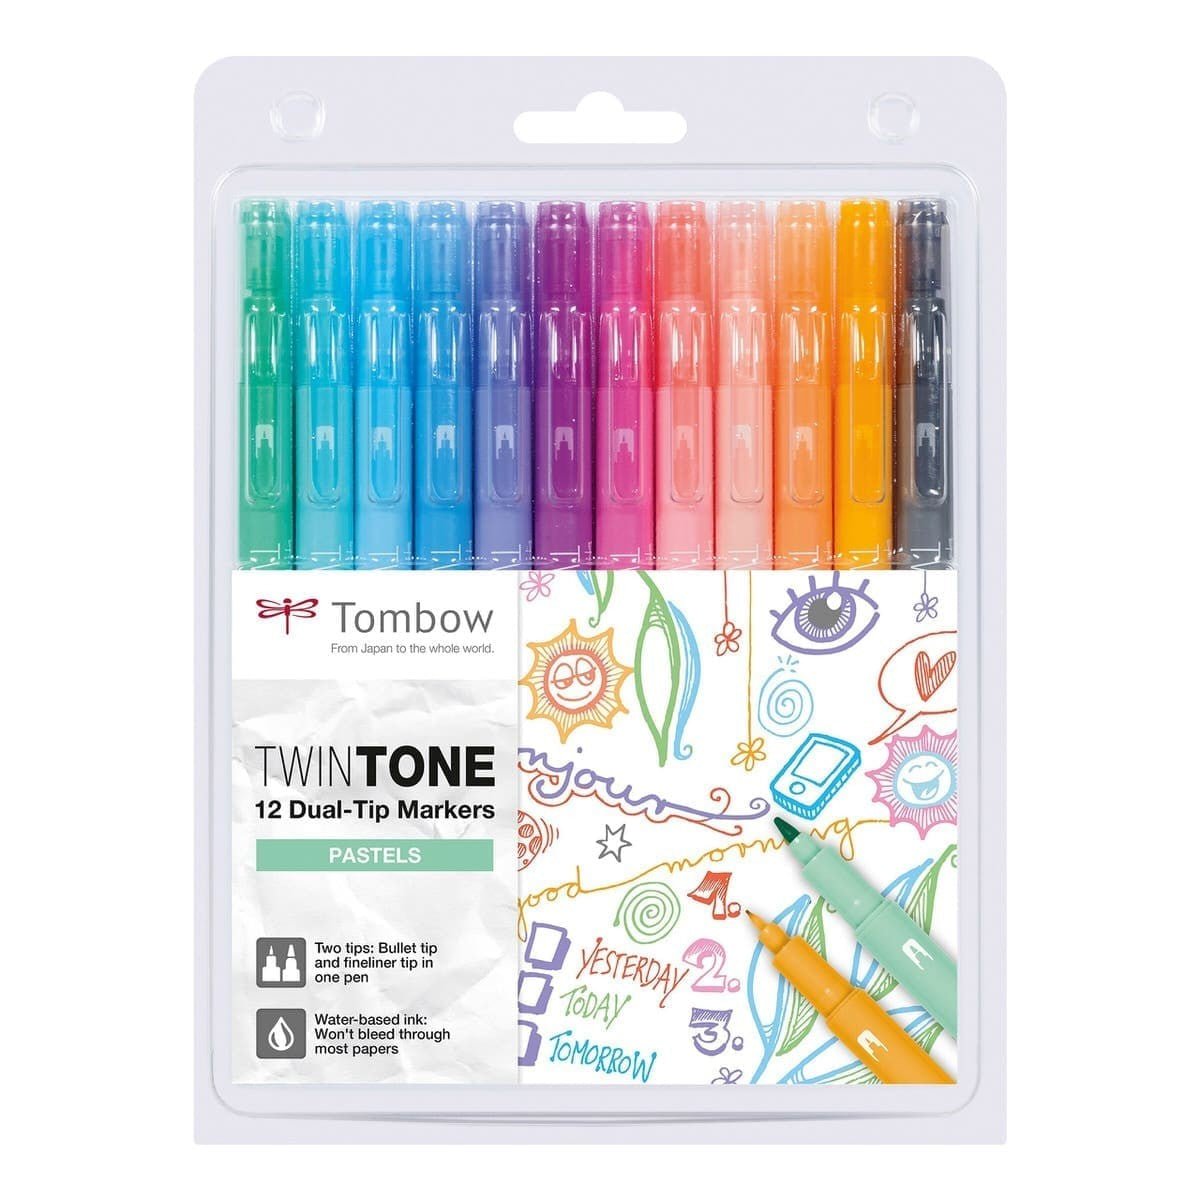 TWINTONE Dual-tip markers 12-pack - Pastels - Tombow - Tidformera